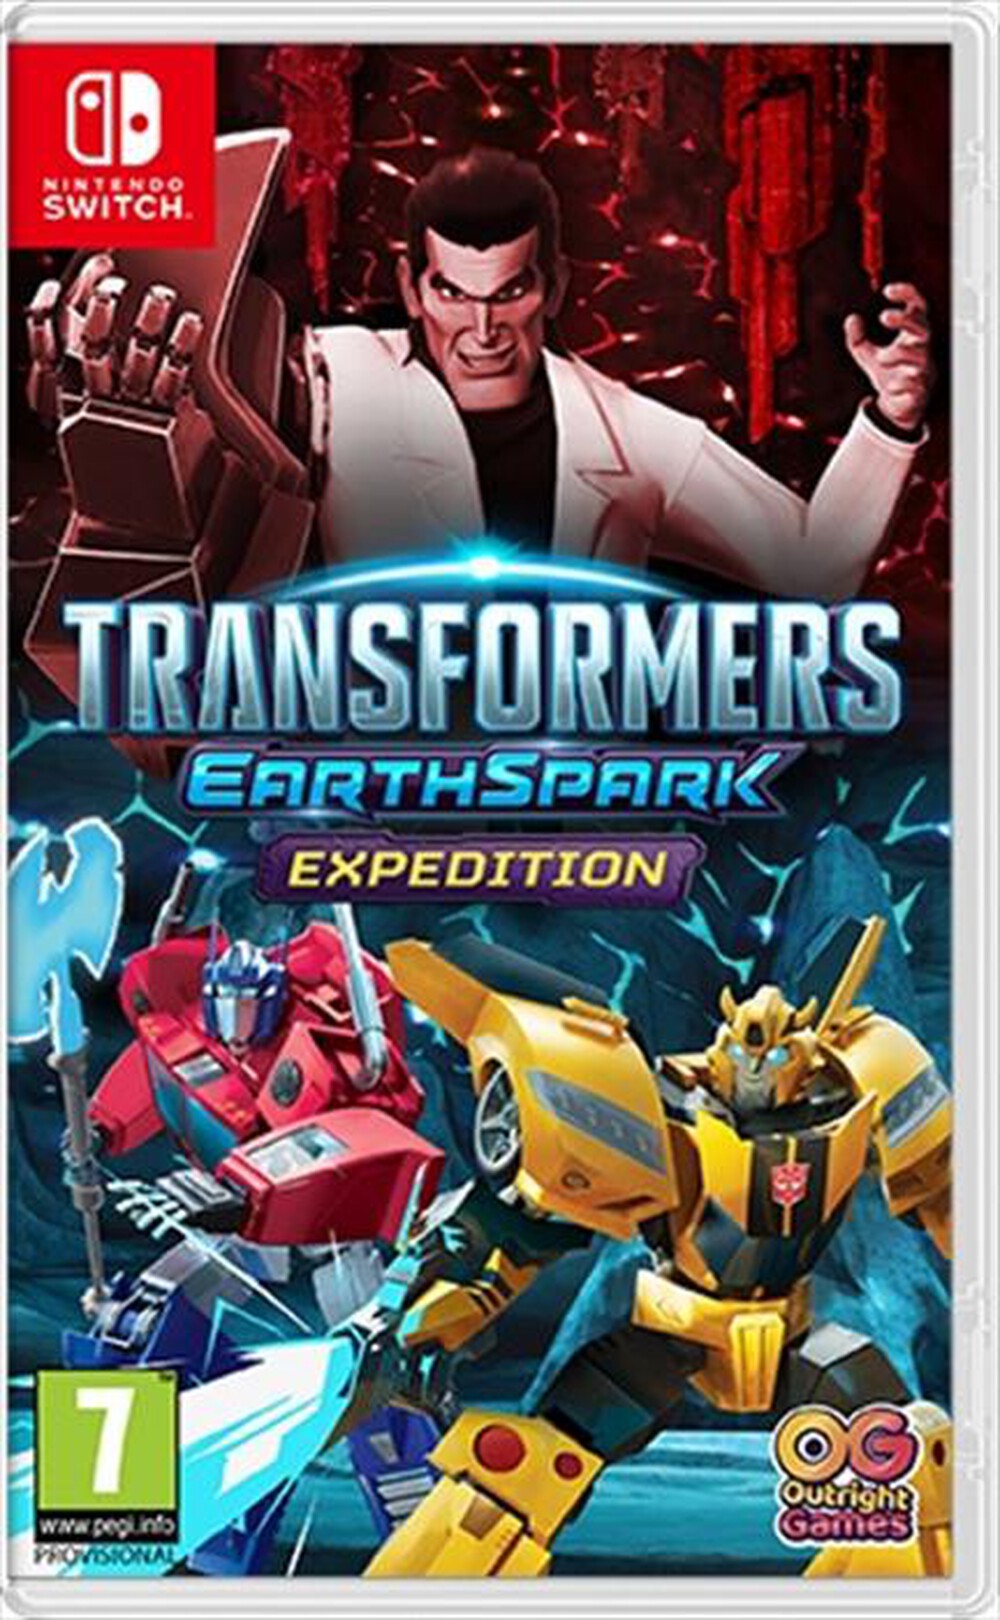 "NAMCO - TRANSFORMERS: EARTHSPARK - IN MISSIONE NSWITCH"